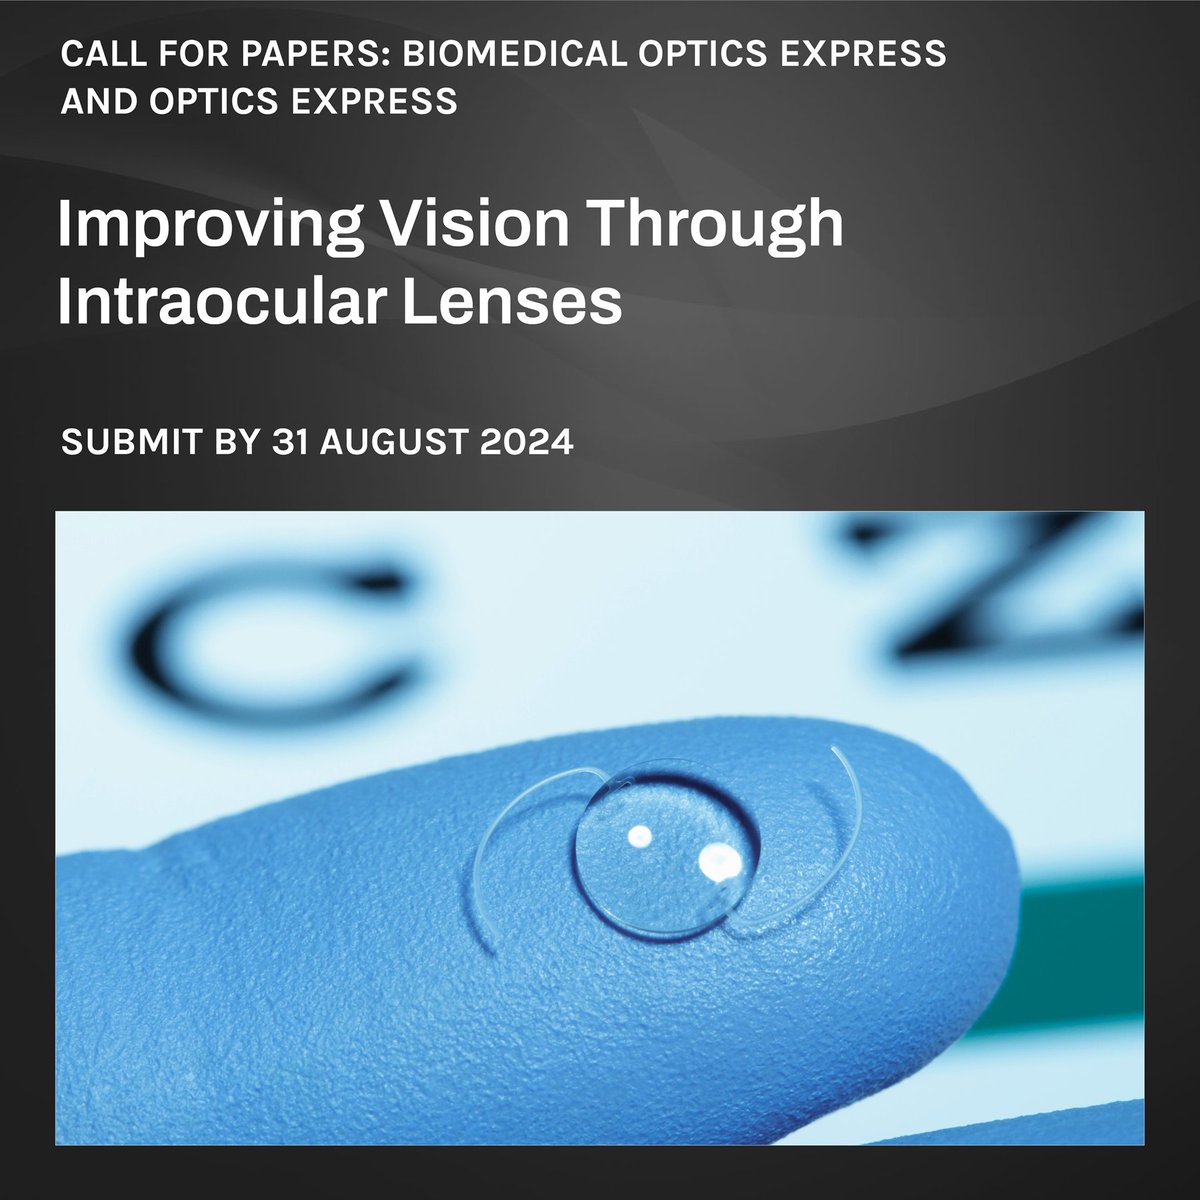 A joint Feature Issue in #OPG_BOEx and #OPG_OpEx will focus on the latest advancements on intraocular lenses, including conception, design, manufacturing, testing, selection optimization, and patient evaluation. Learn More and submit by 31 August: ow.ly/aVeY50RFNeg